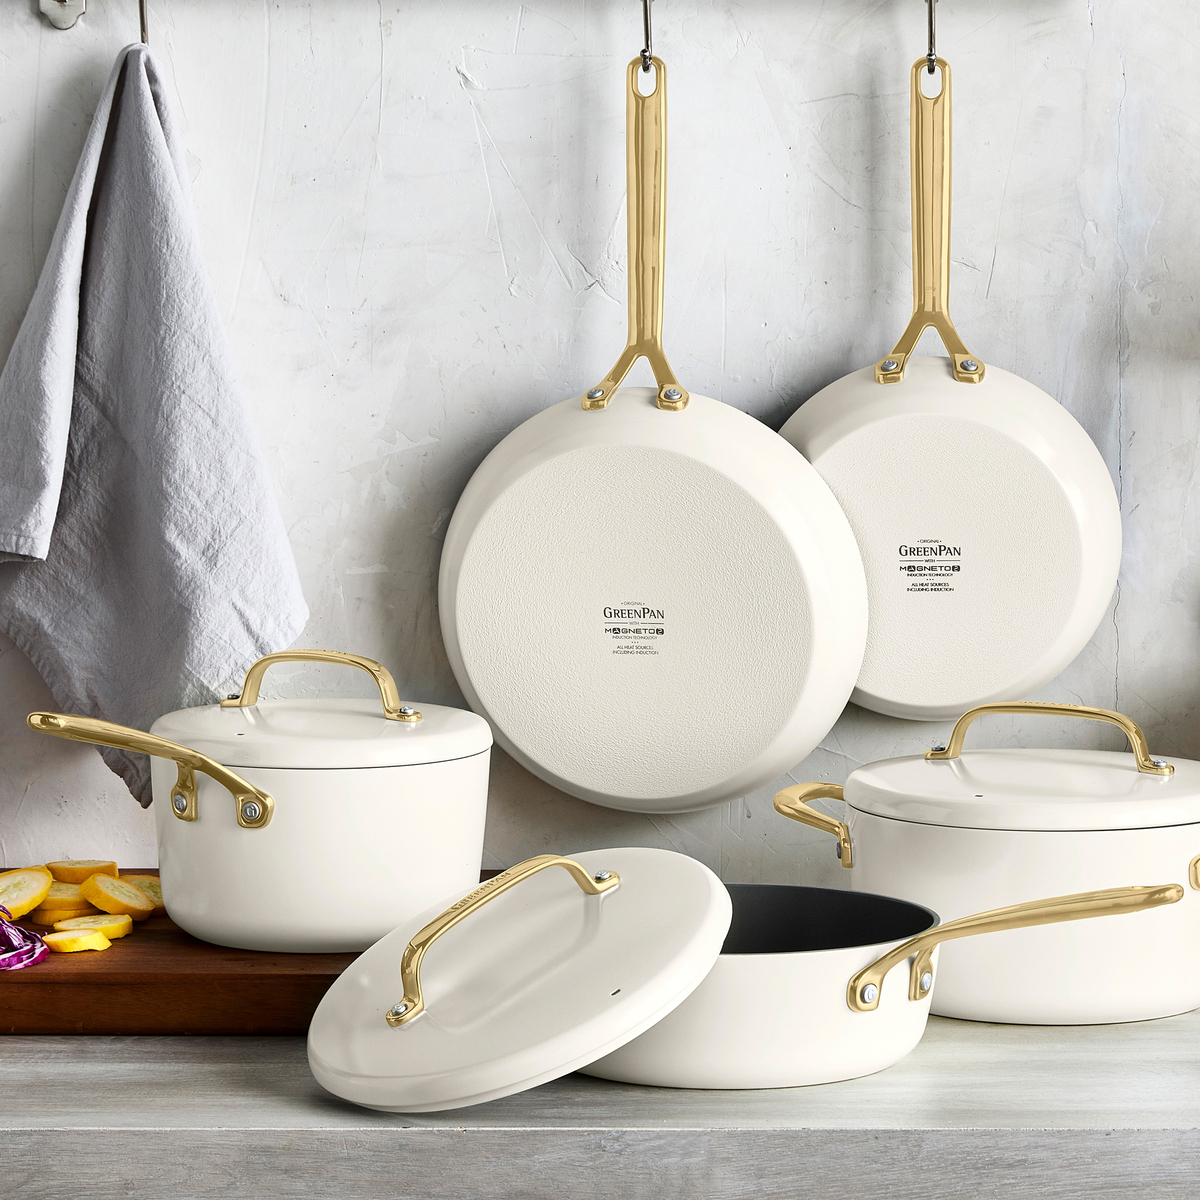 Cookware Sets: Up to 60% Off